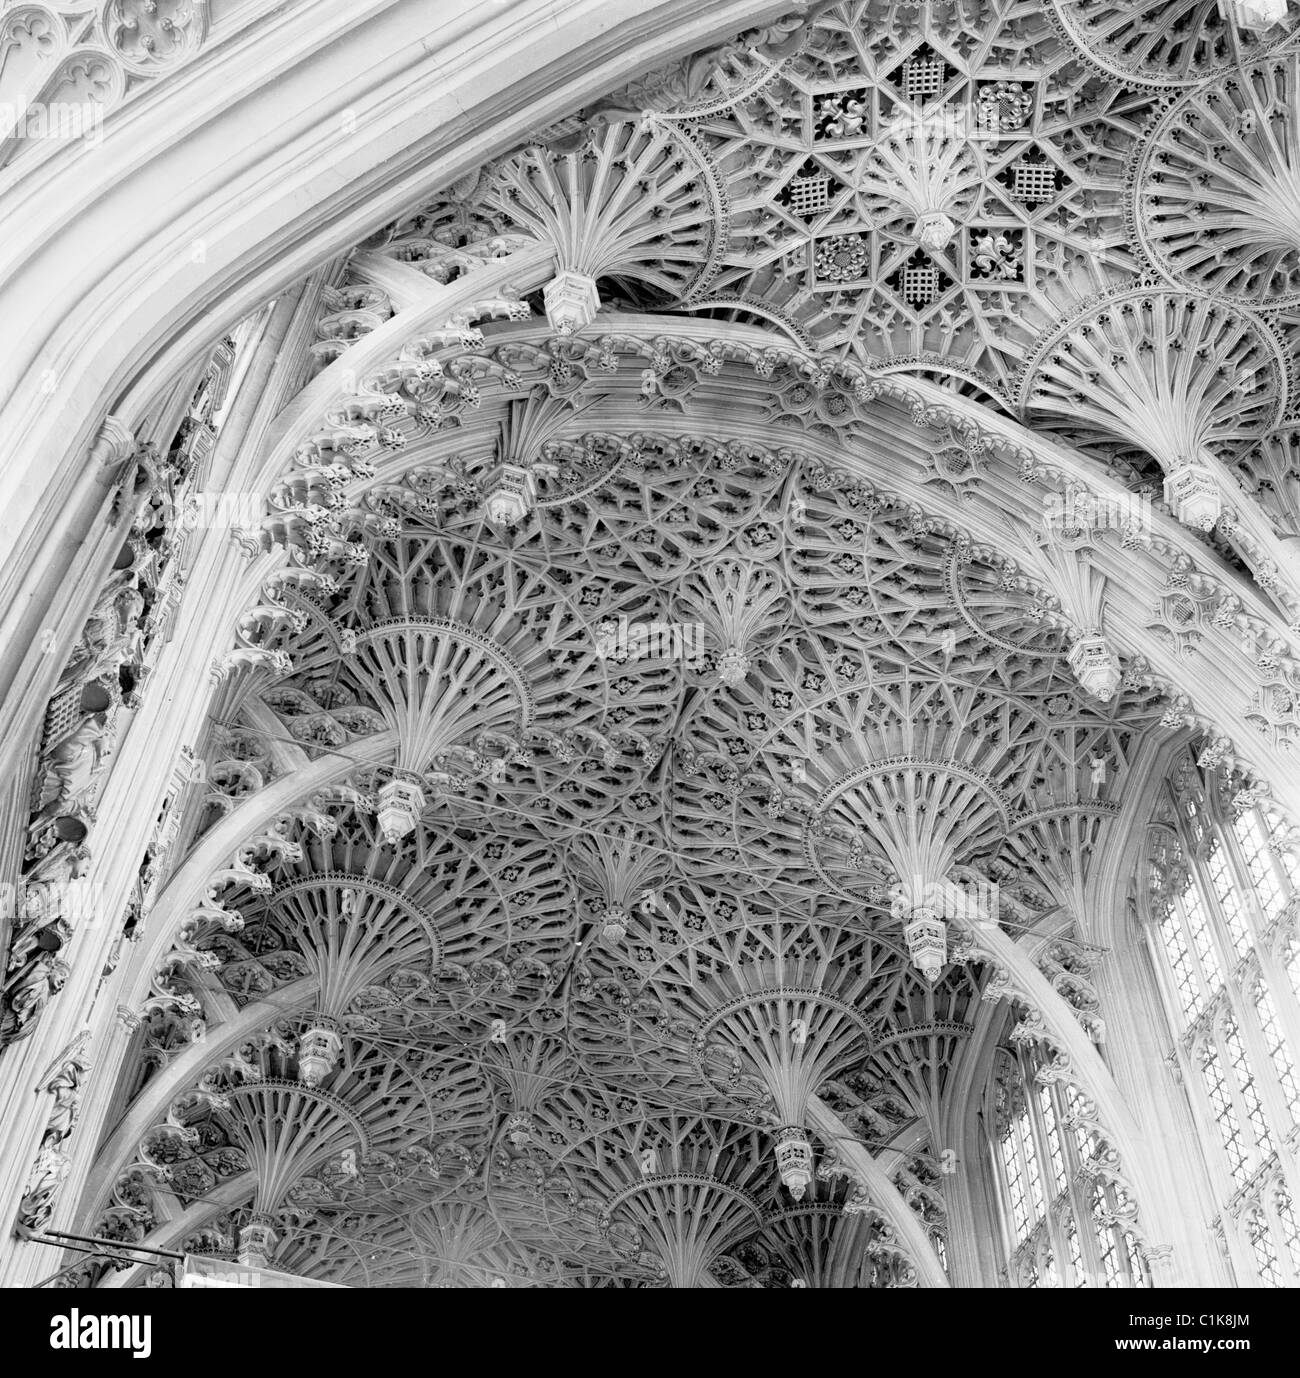 1950s, the interior of the ornate  and highly decorative roof of the Henry VII Chapel at Westminster Abbey, London, England. Stock Photo